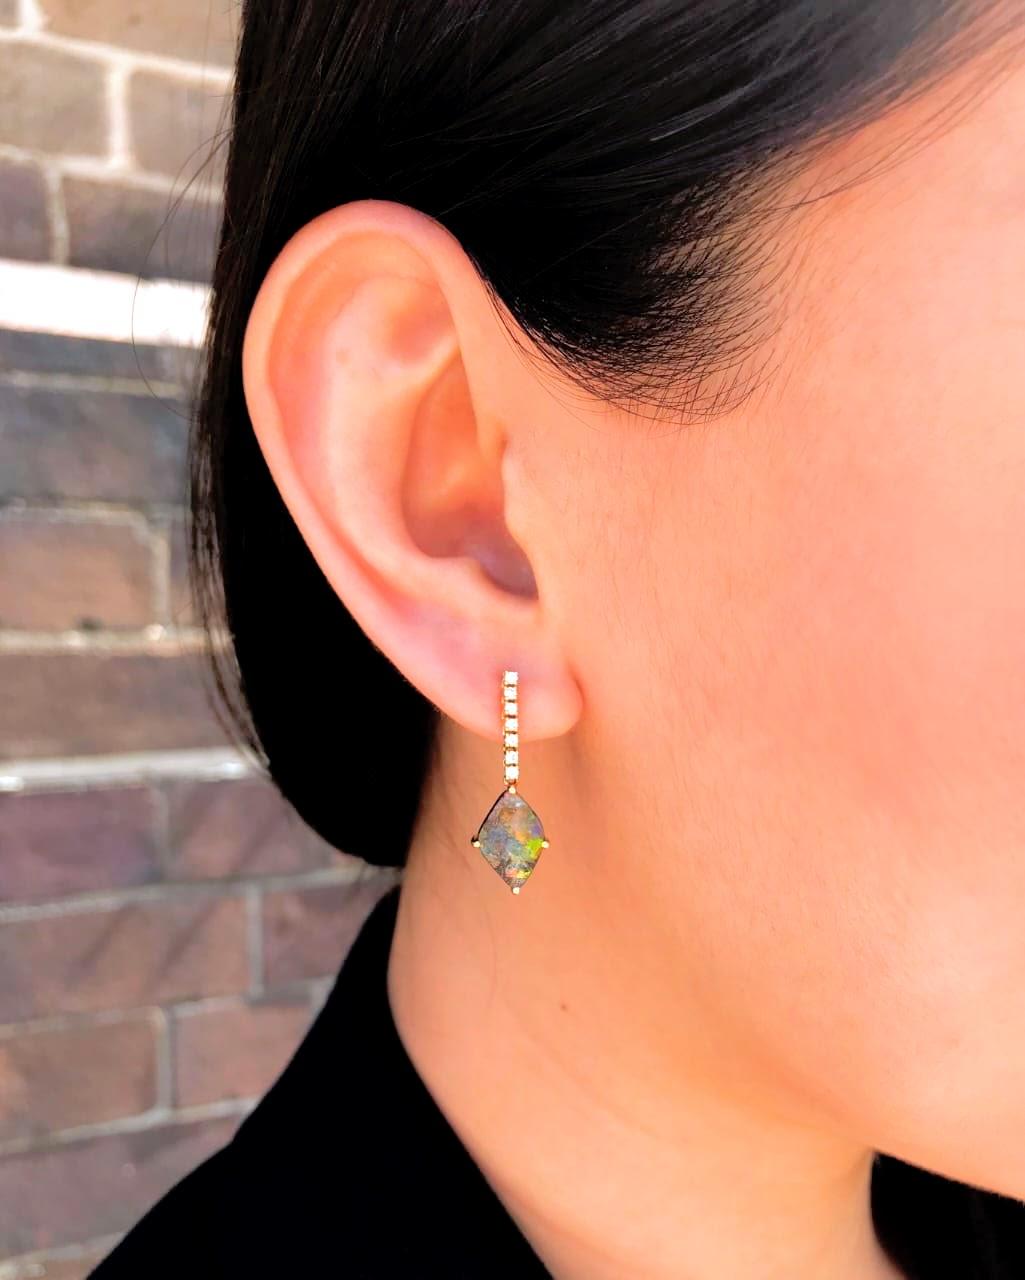 Intense and passionate, “Casablanca” opal earrings recall the glamour of this classic noir. Striking boulder opals (4.26ct) from Winton are set in 18K yellow gold with a supporting cast of sparkling diamonds. Designed by Renata Bernard.

The